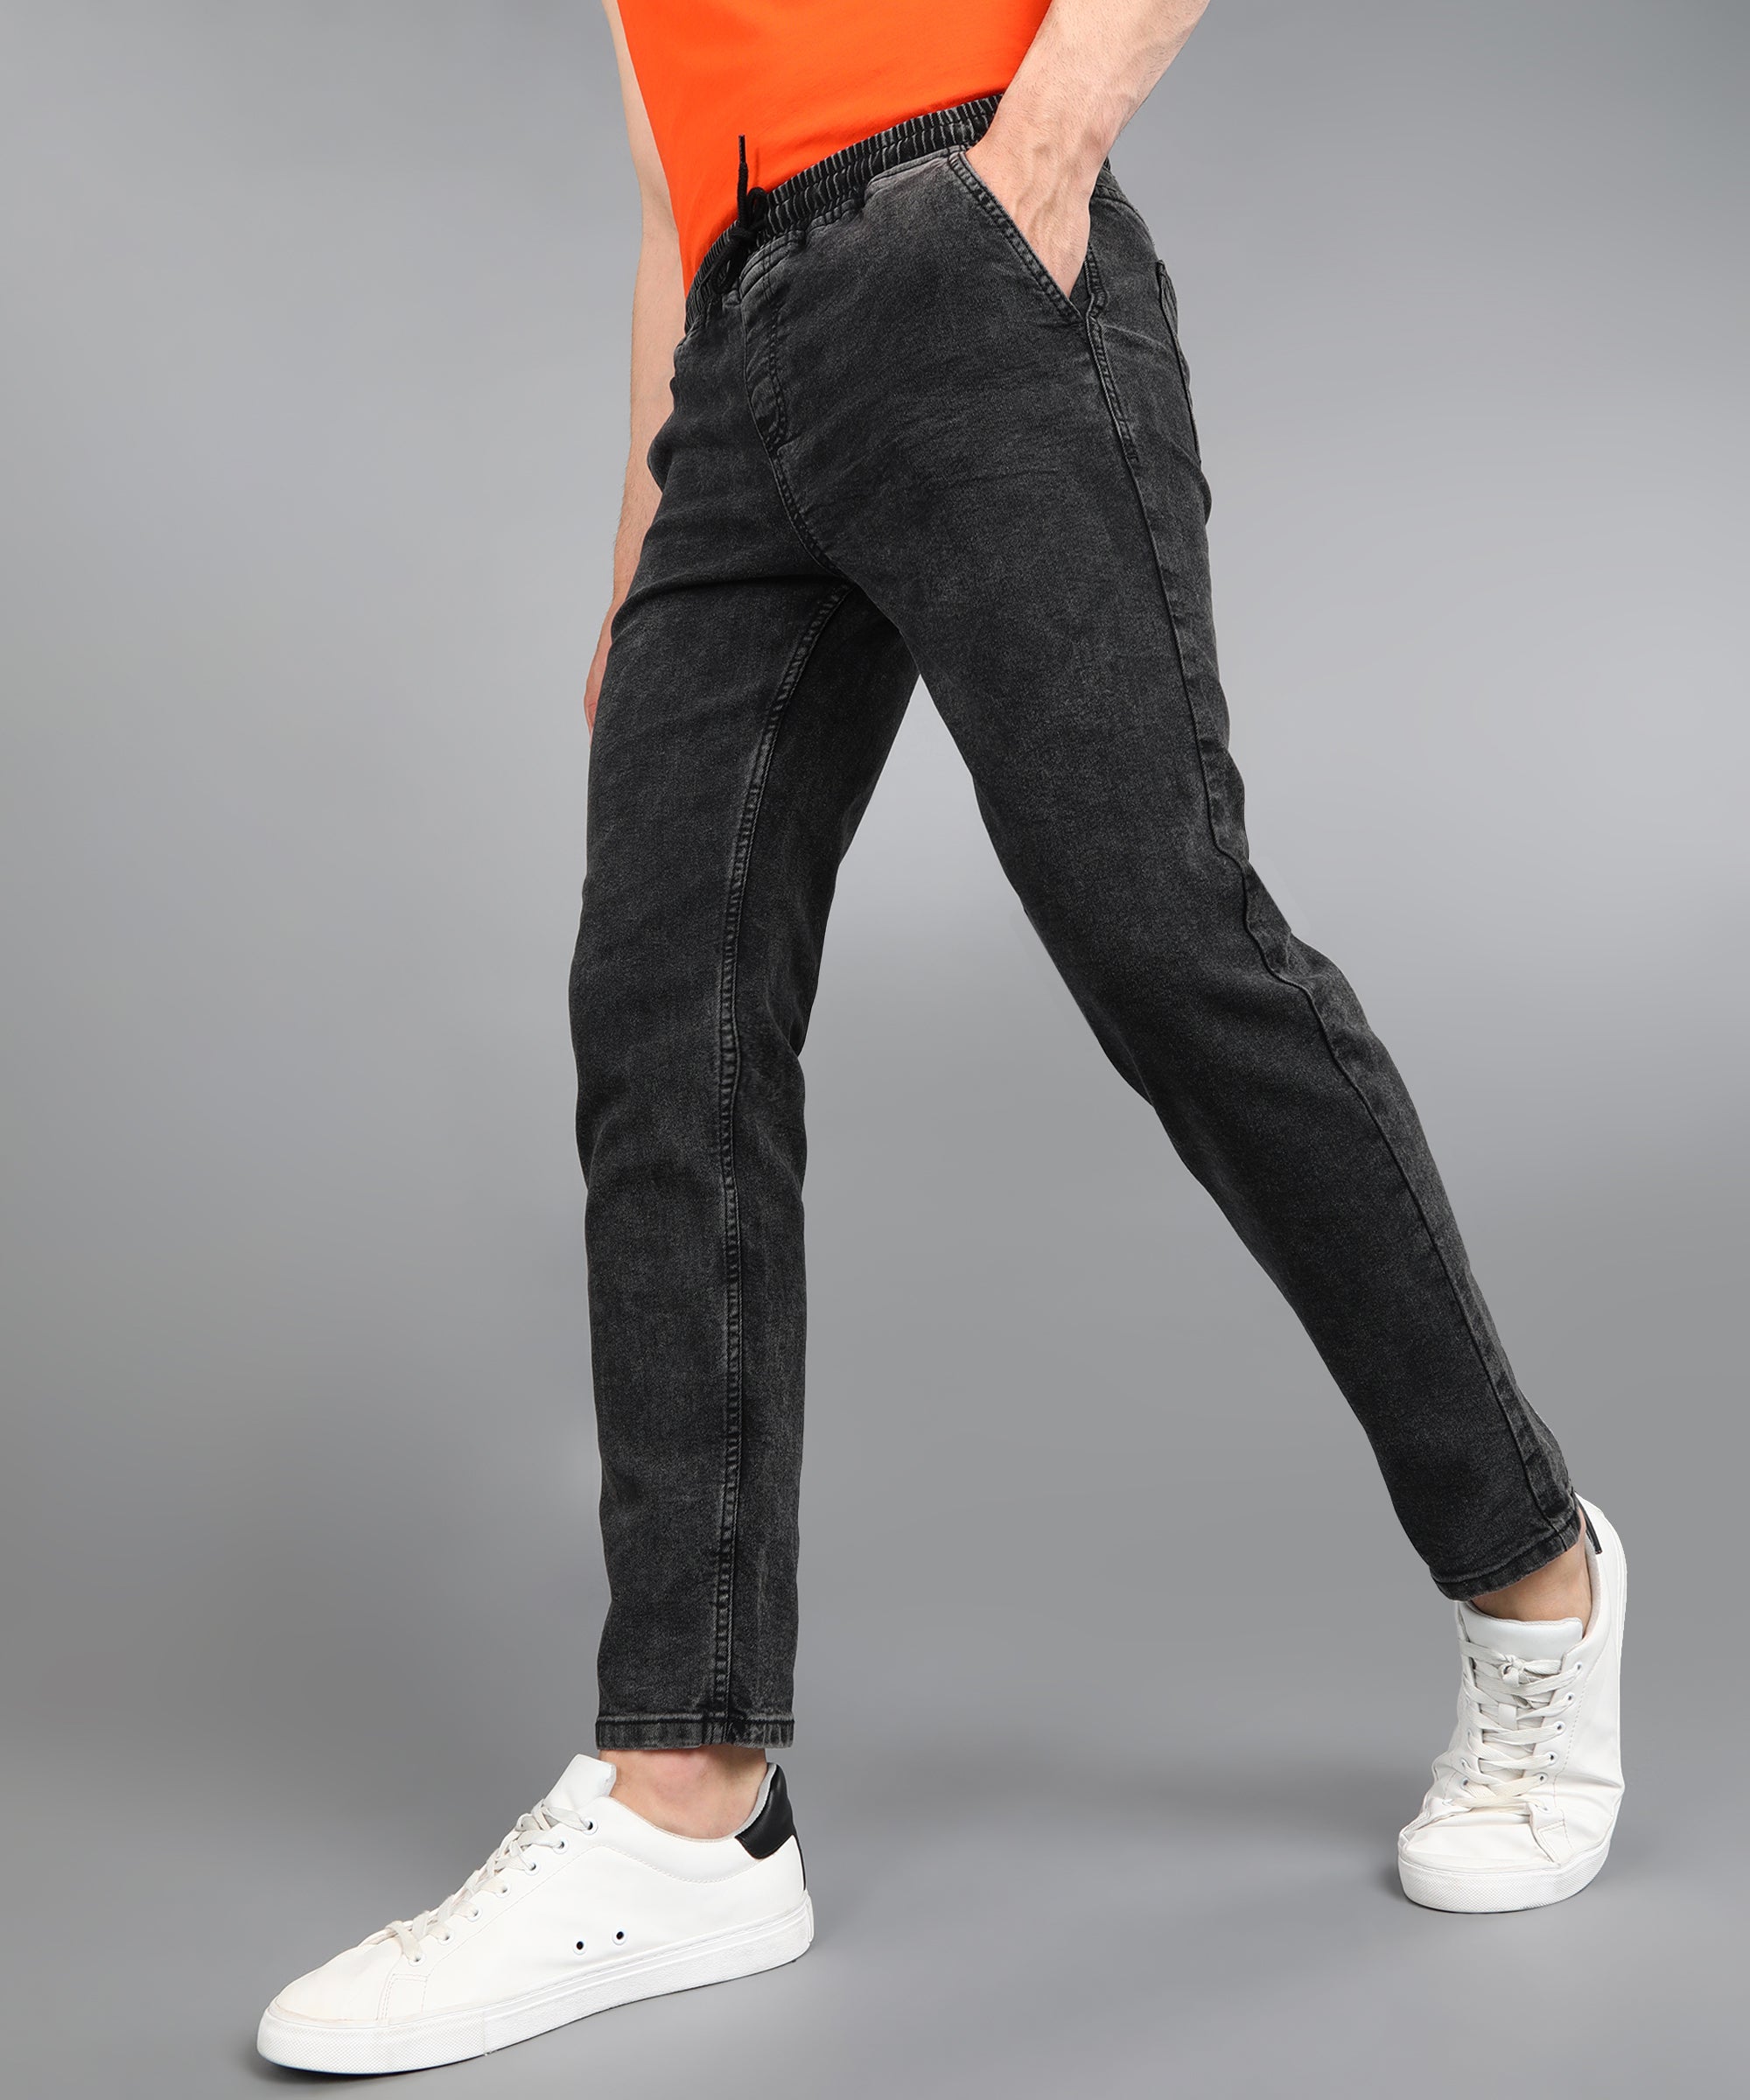 Urbano Fashion Men's Charcoal Black Regular Fit Washed Jogger Jeans Stretchable